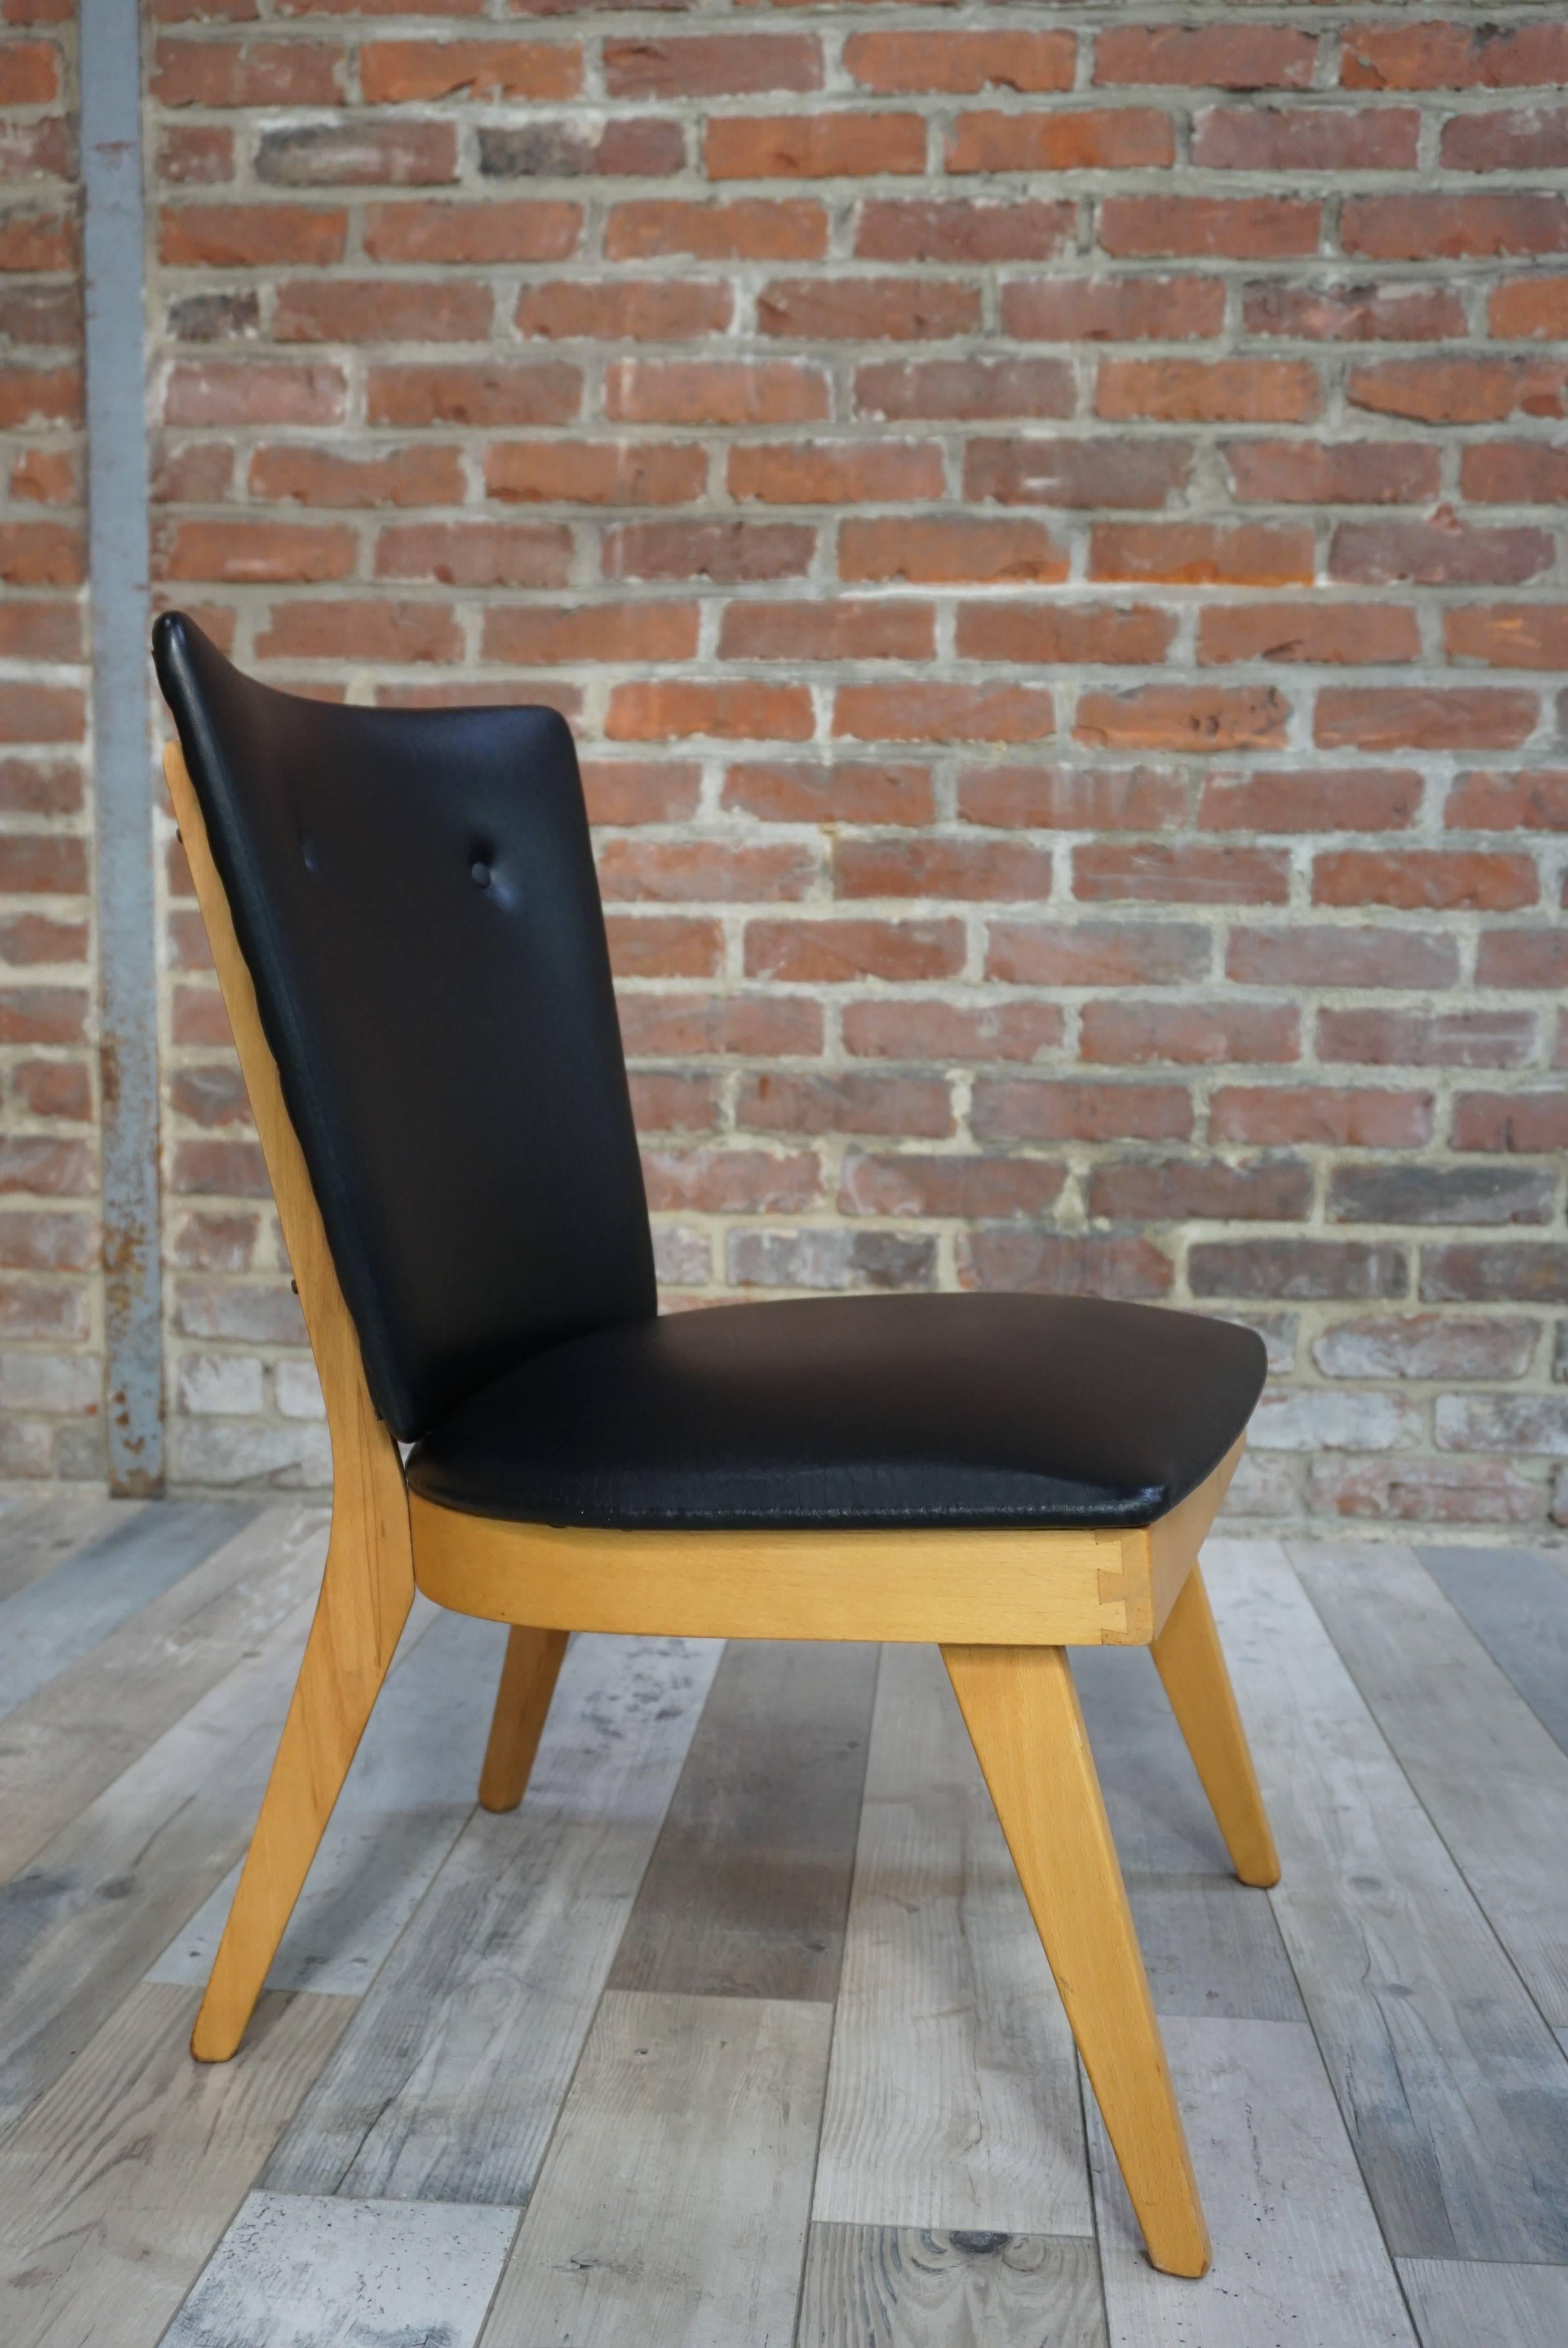 Adorable cocktail armchair from the 1950s, with wooden structure, compass feet, seat and curved back dressed in imitation black leather.